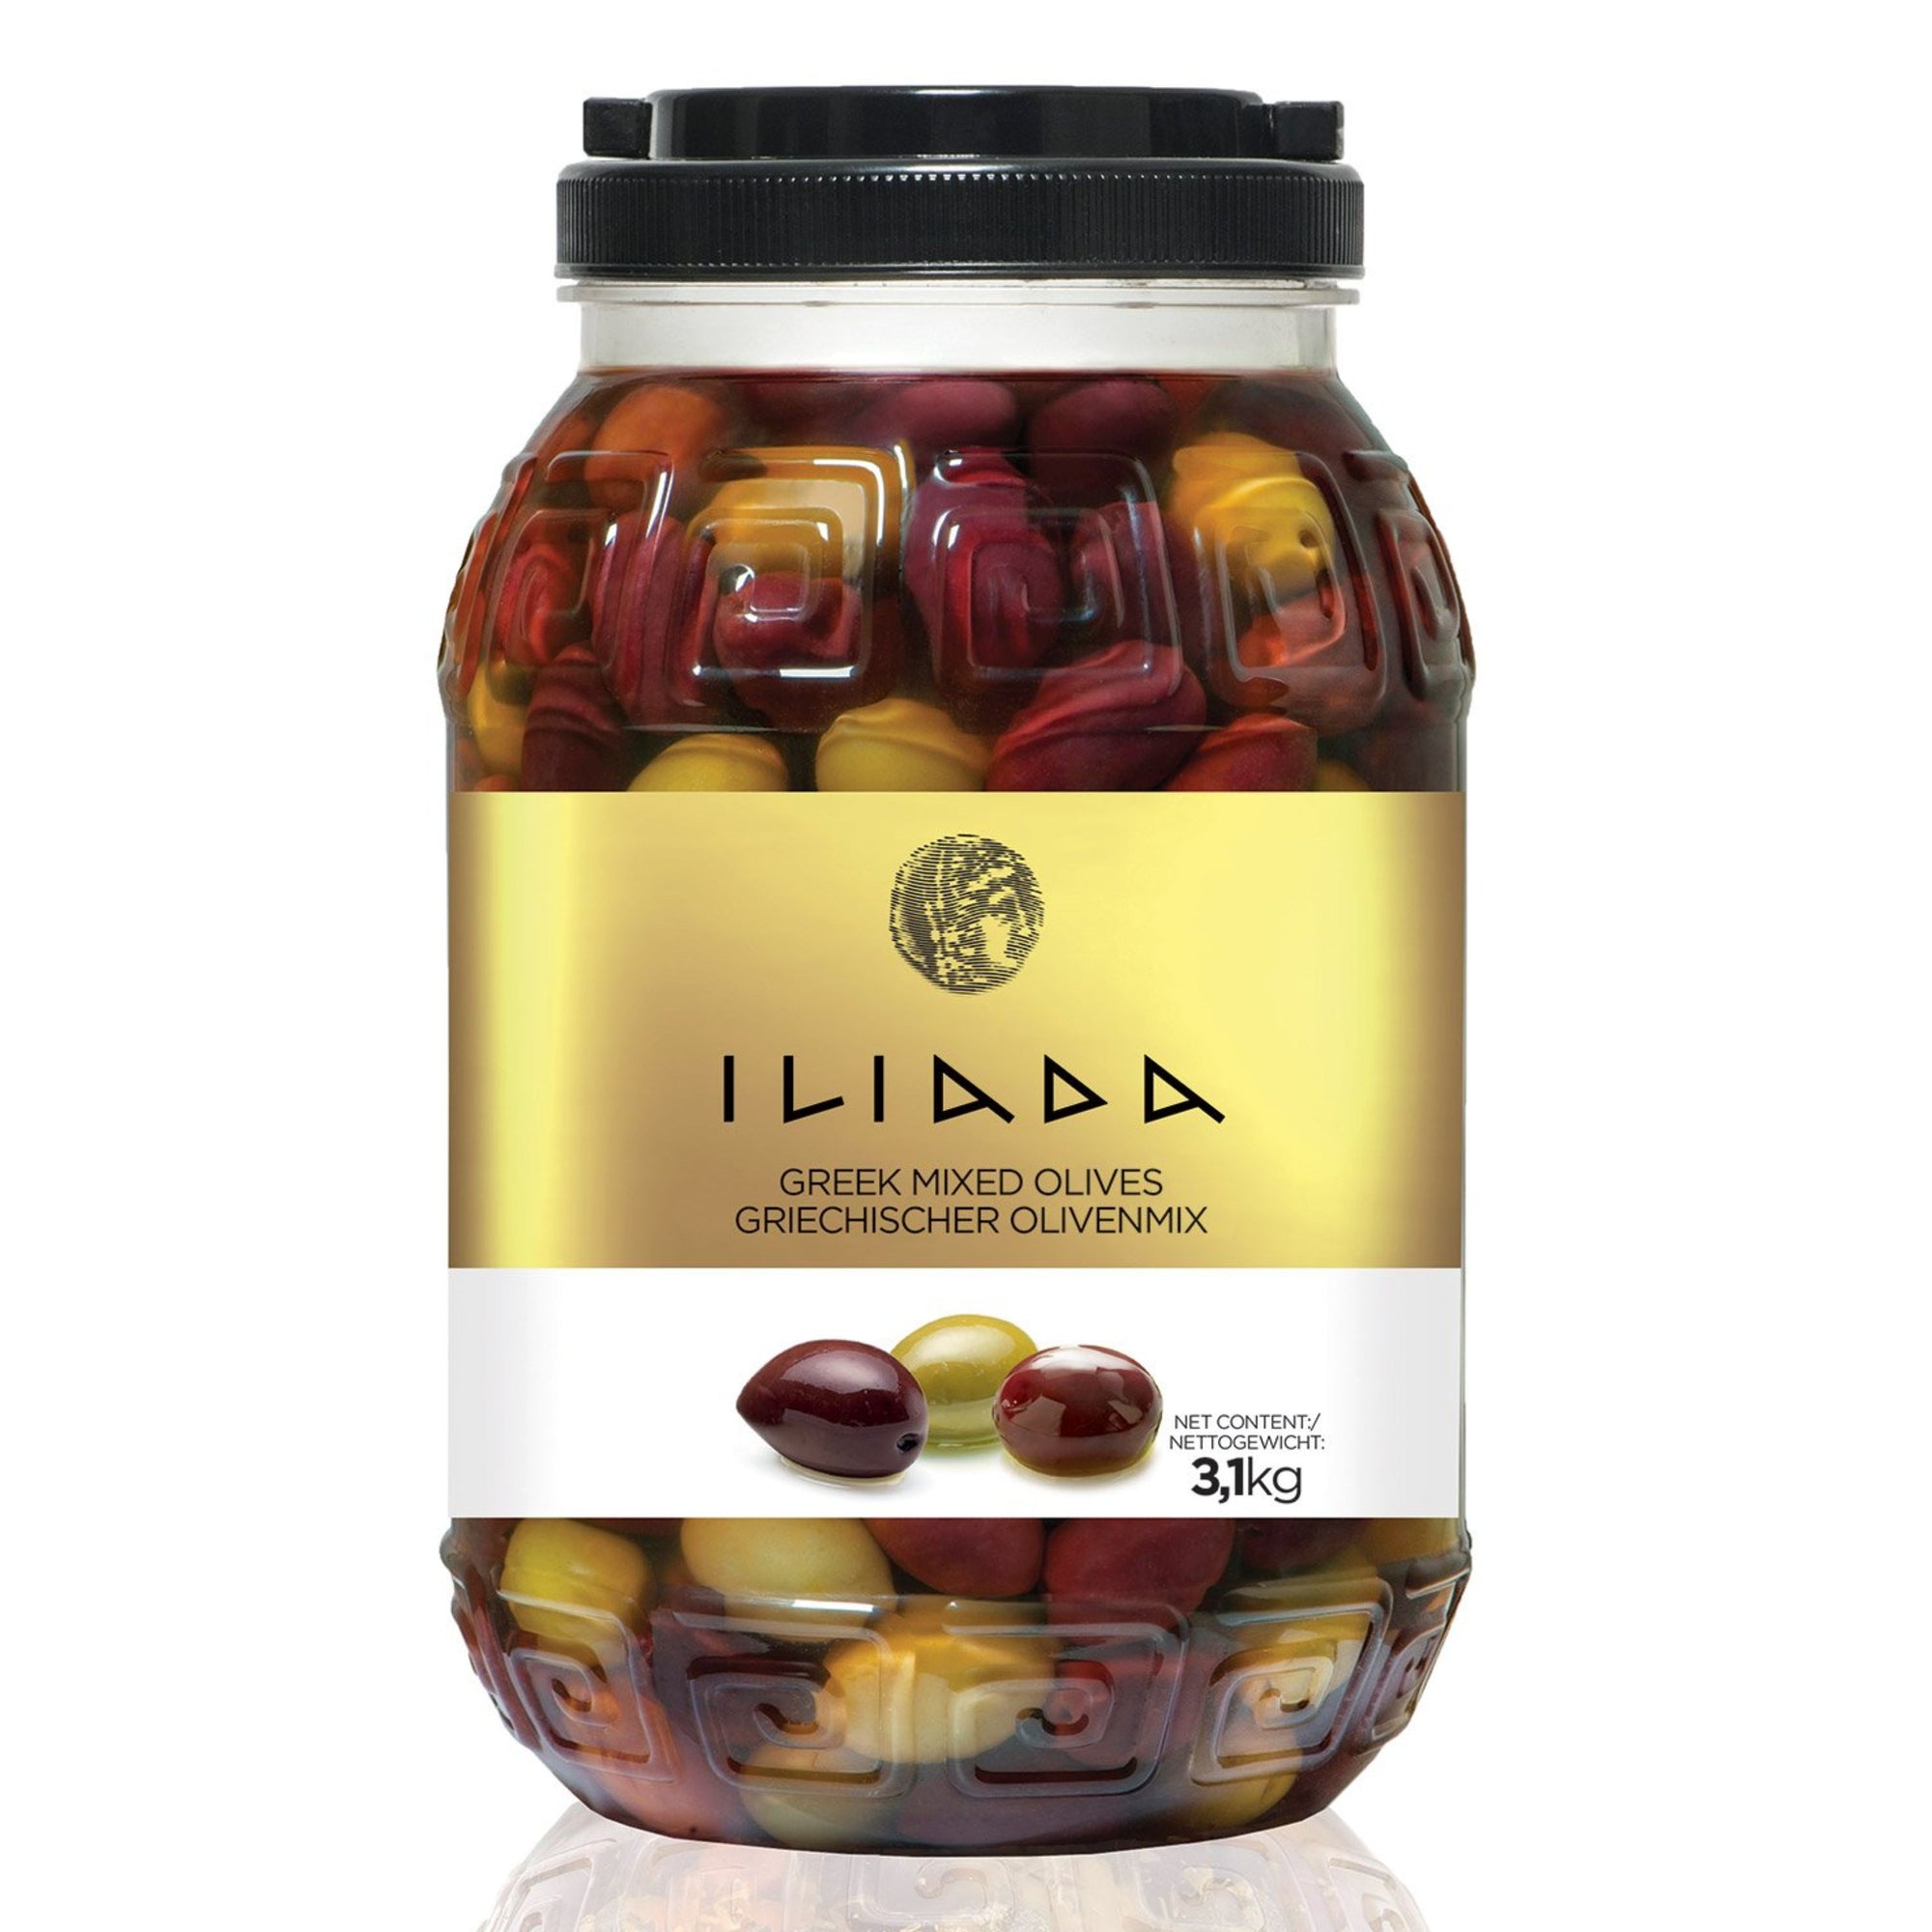 Mixed Whole Olives 'Iliada' CLEAR PET drum 3kg (1.8kg drained)